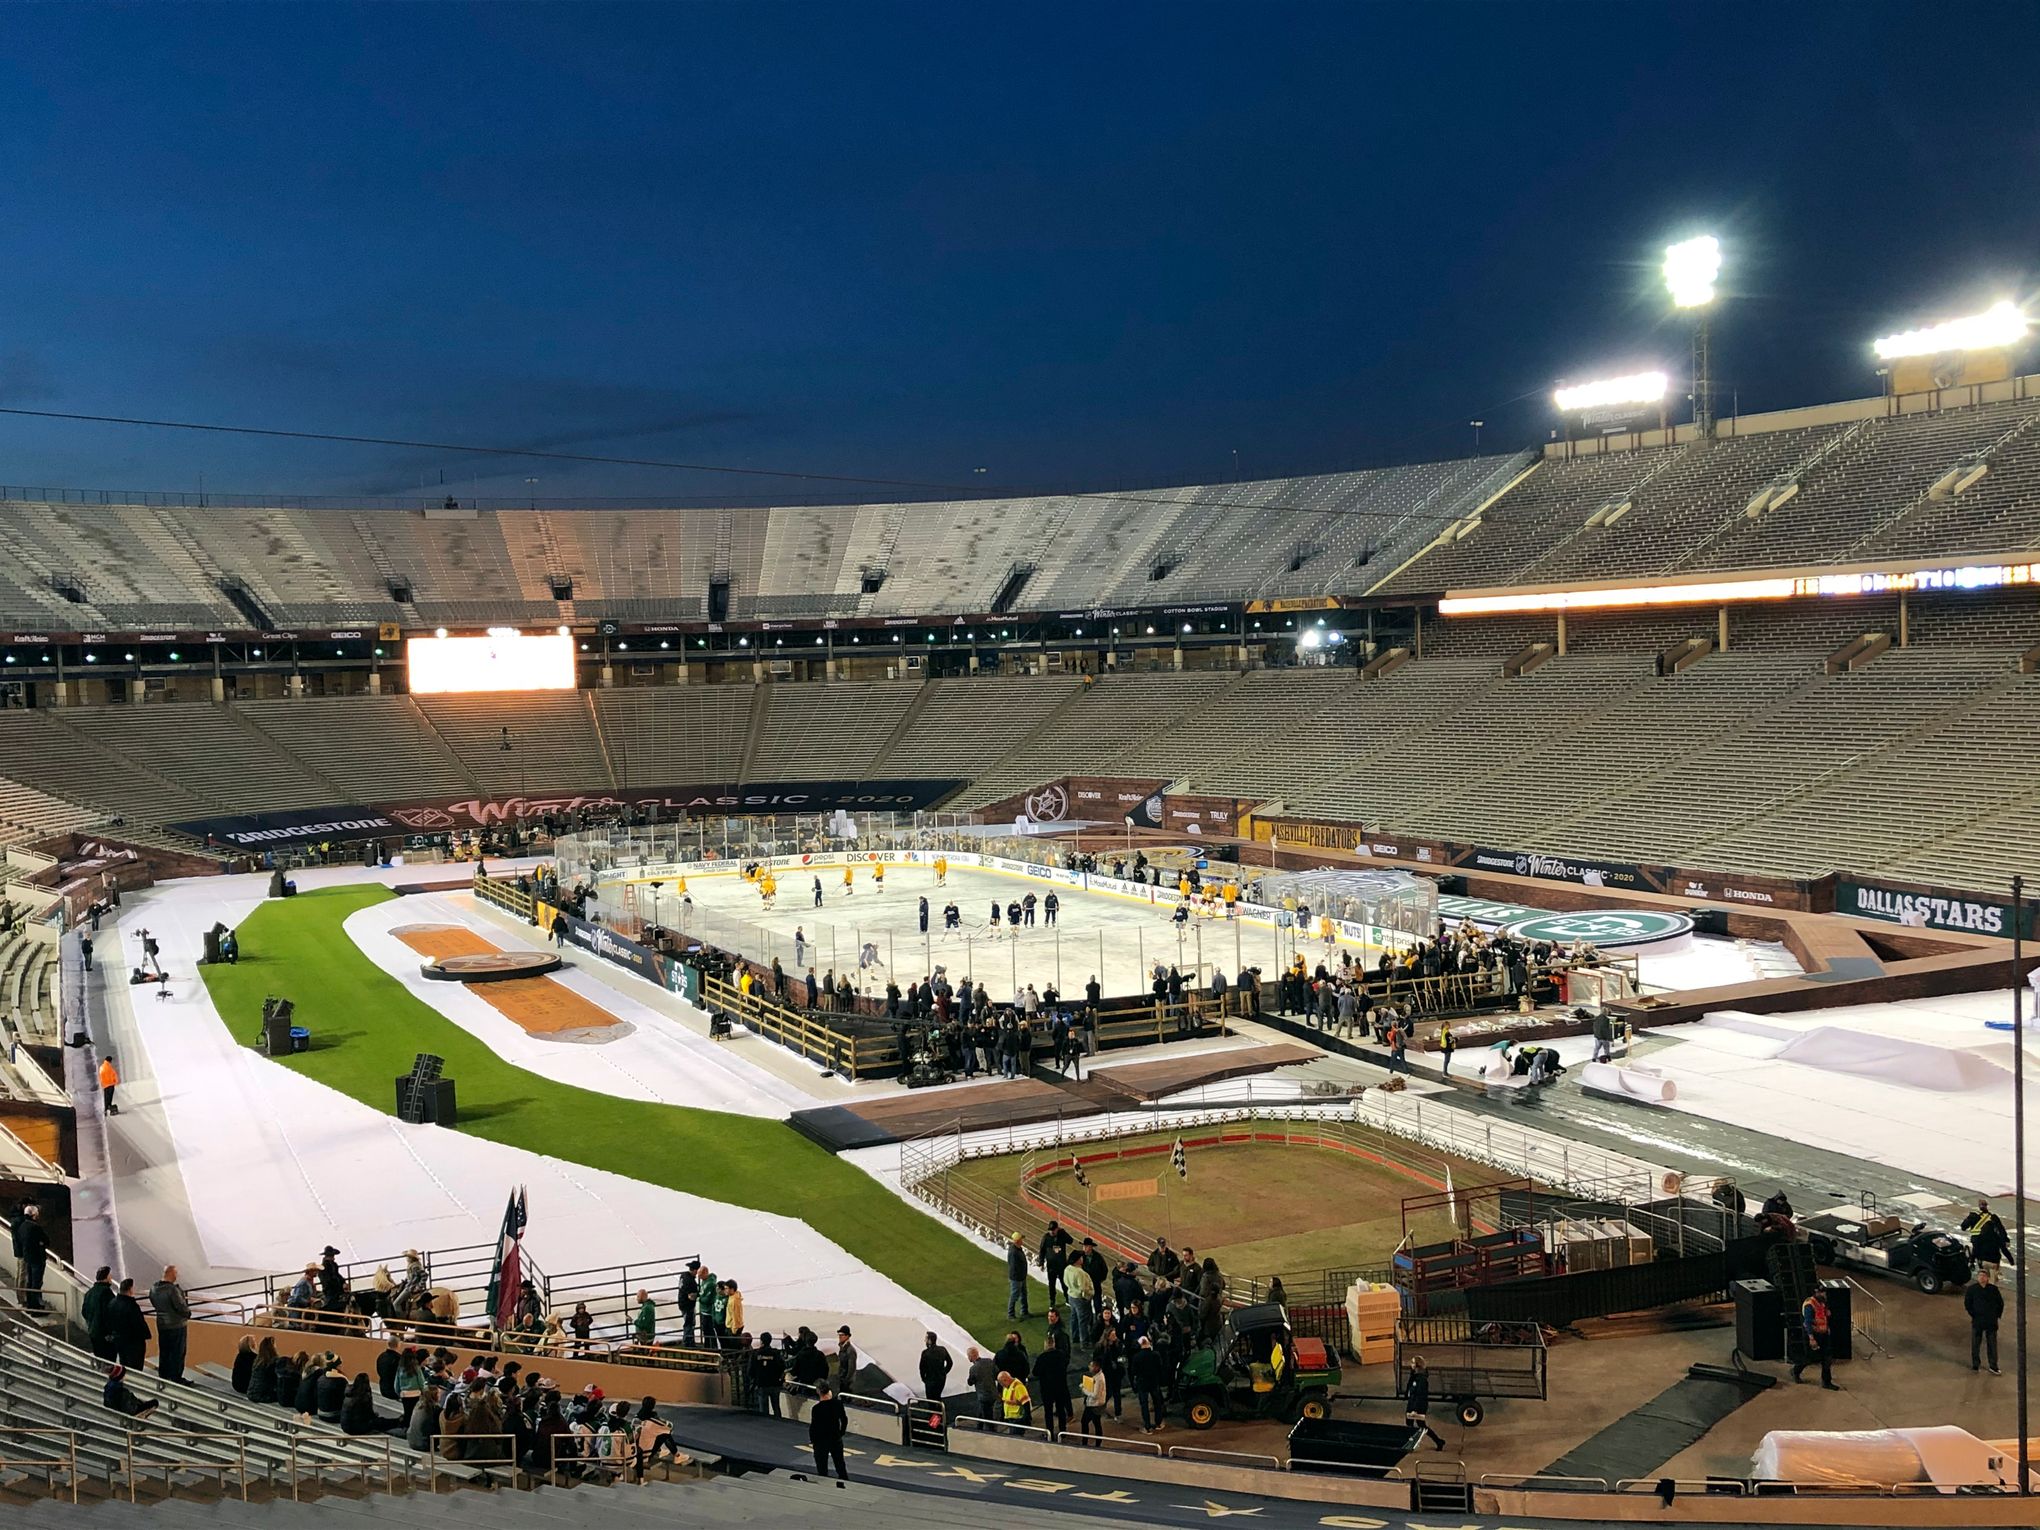 NHL's Winter Classic is bigger this year